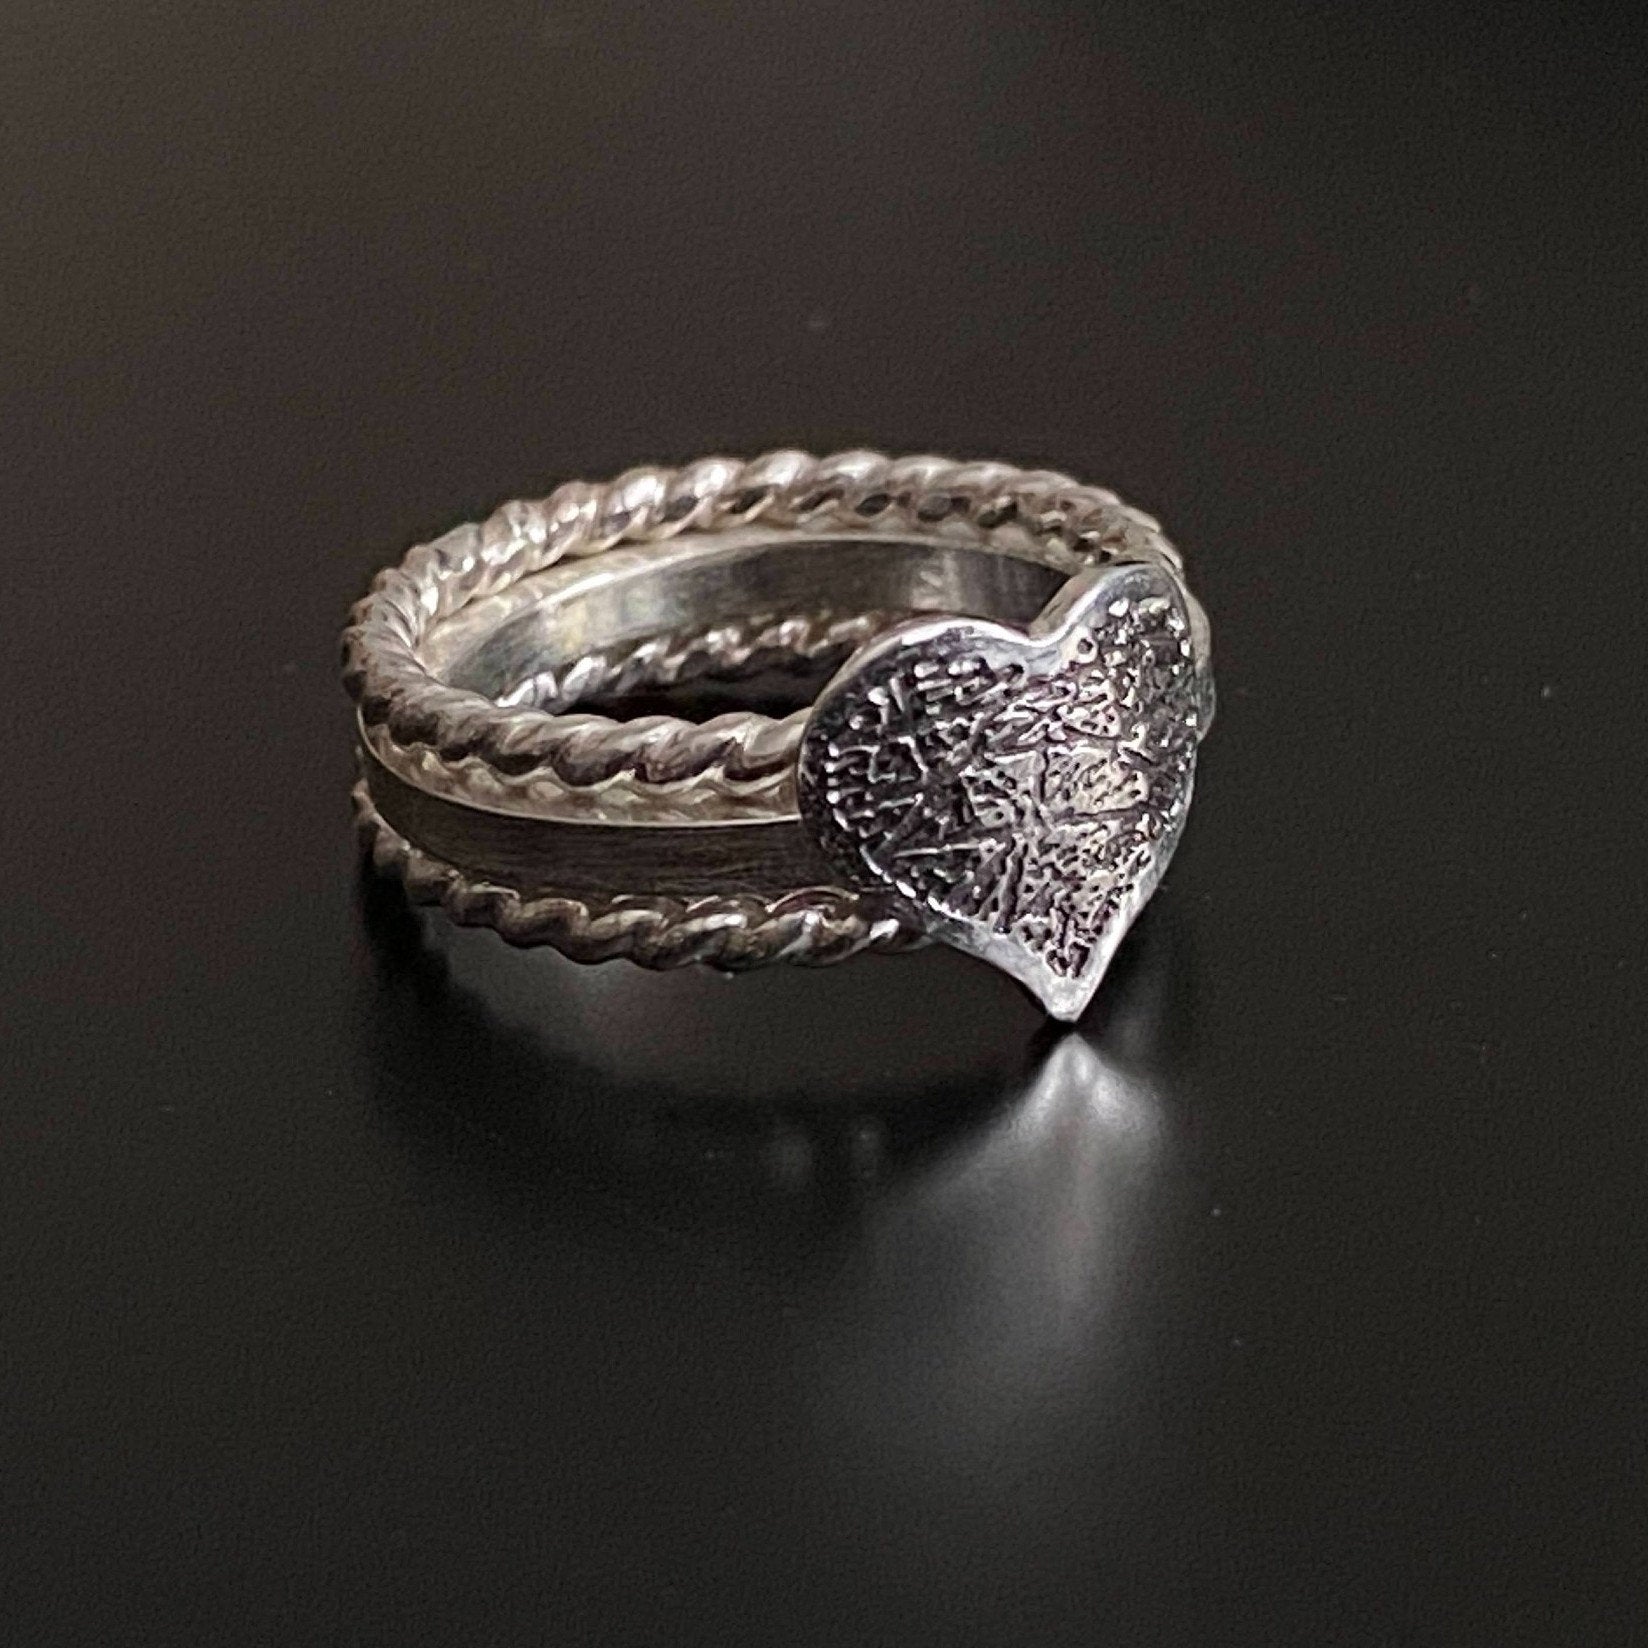 Stacking Square & Twist Band Fingerprint Rings - Sterling Silver